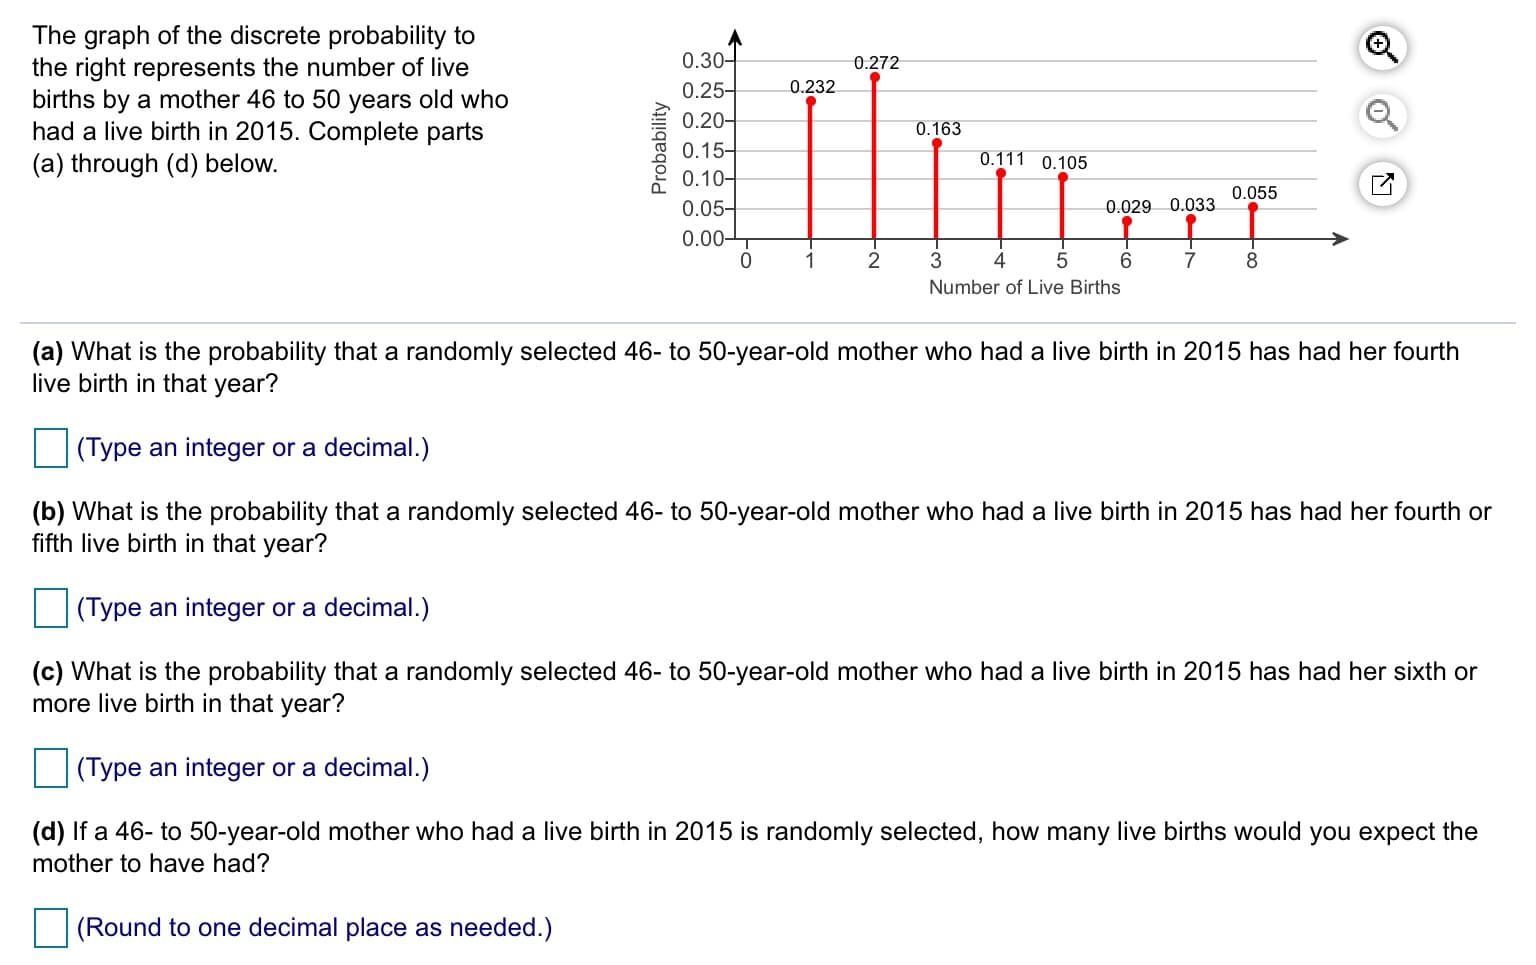 The graph of the discrete probability to
the right represents the number of live
births by a mother 46 to 50 years old who
had a live birth in 2015. Complete parts
(a) through (d) below.
0.30-
0.25-
0.20-
0.15-
0.10-
0.05-
0.00-
0.272
0.232
0.163
0.111 0.105
0.055
0.033
0.029
1
3
4
8
Number of Live Births
(a) What is the probability that a randomly selected 46- to 50-year-old mother who had a live birth in 2015 has had her fourth
live birth in that year?
(Type an integer or a decimal.)
(b) What is the probability that a randomly selected 46- to 50-year-old mother who had a live birth in 2015 has had her fourth or
fifth live birth in that year?
(Type an integer or a decimal.)
(c) What is the probability that a randomly selected 46- to 50-year-old mother who had a live birth in 2015 has had her sixth or
more live birth in that year?
(Type an integer or a decimal.)
(d) If a 46- to 50-year-old mother who had a live birth in 2015 is randomly selected, how many live births would you expect the
mother to have had?
(Round to one decimal place as needed.)
